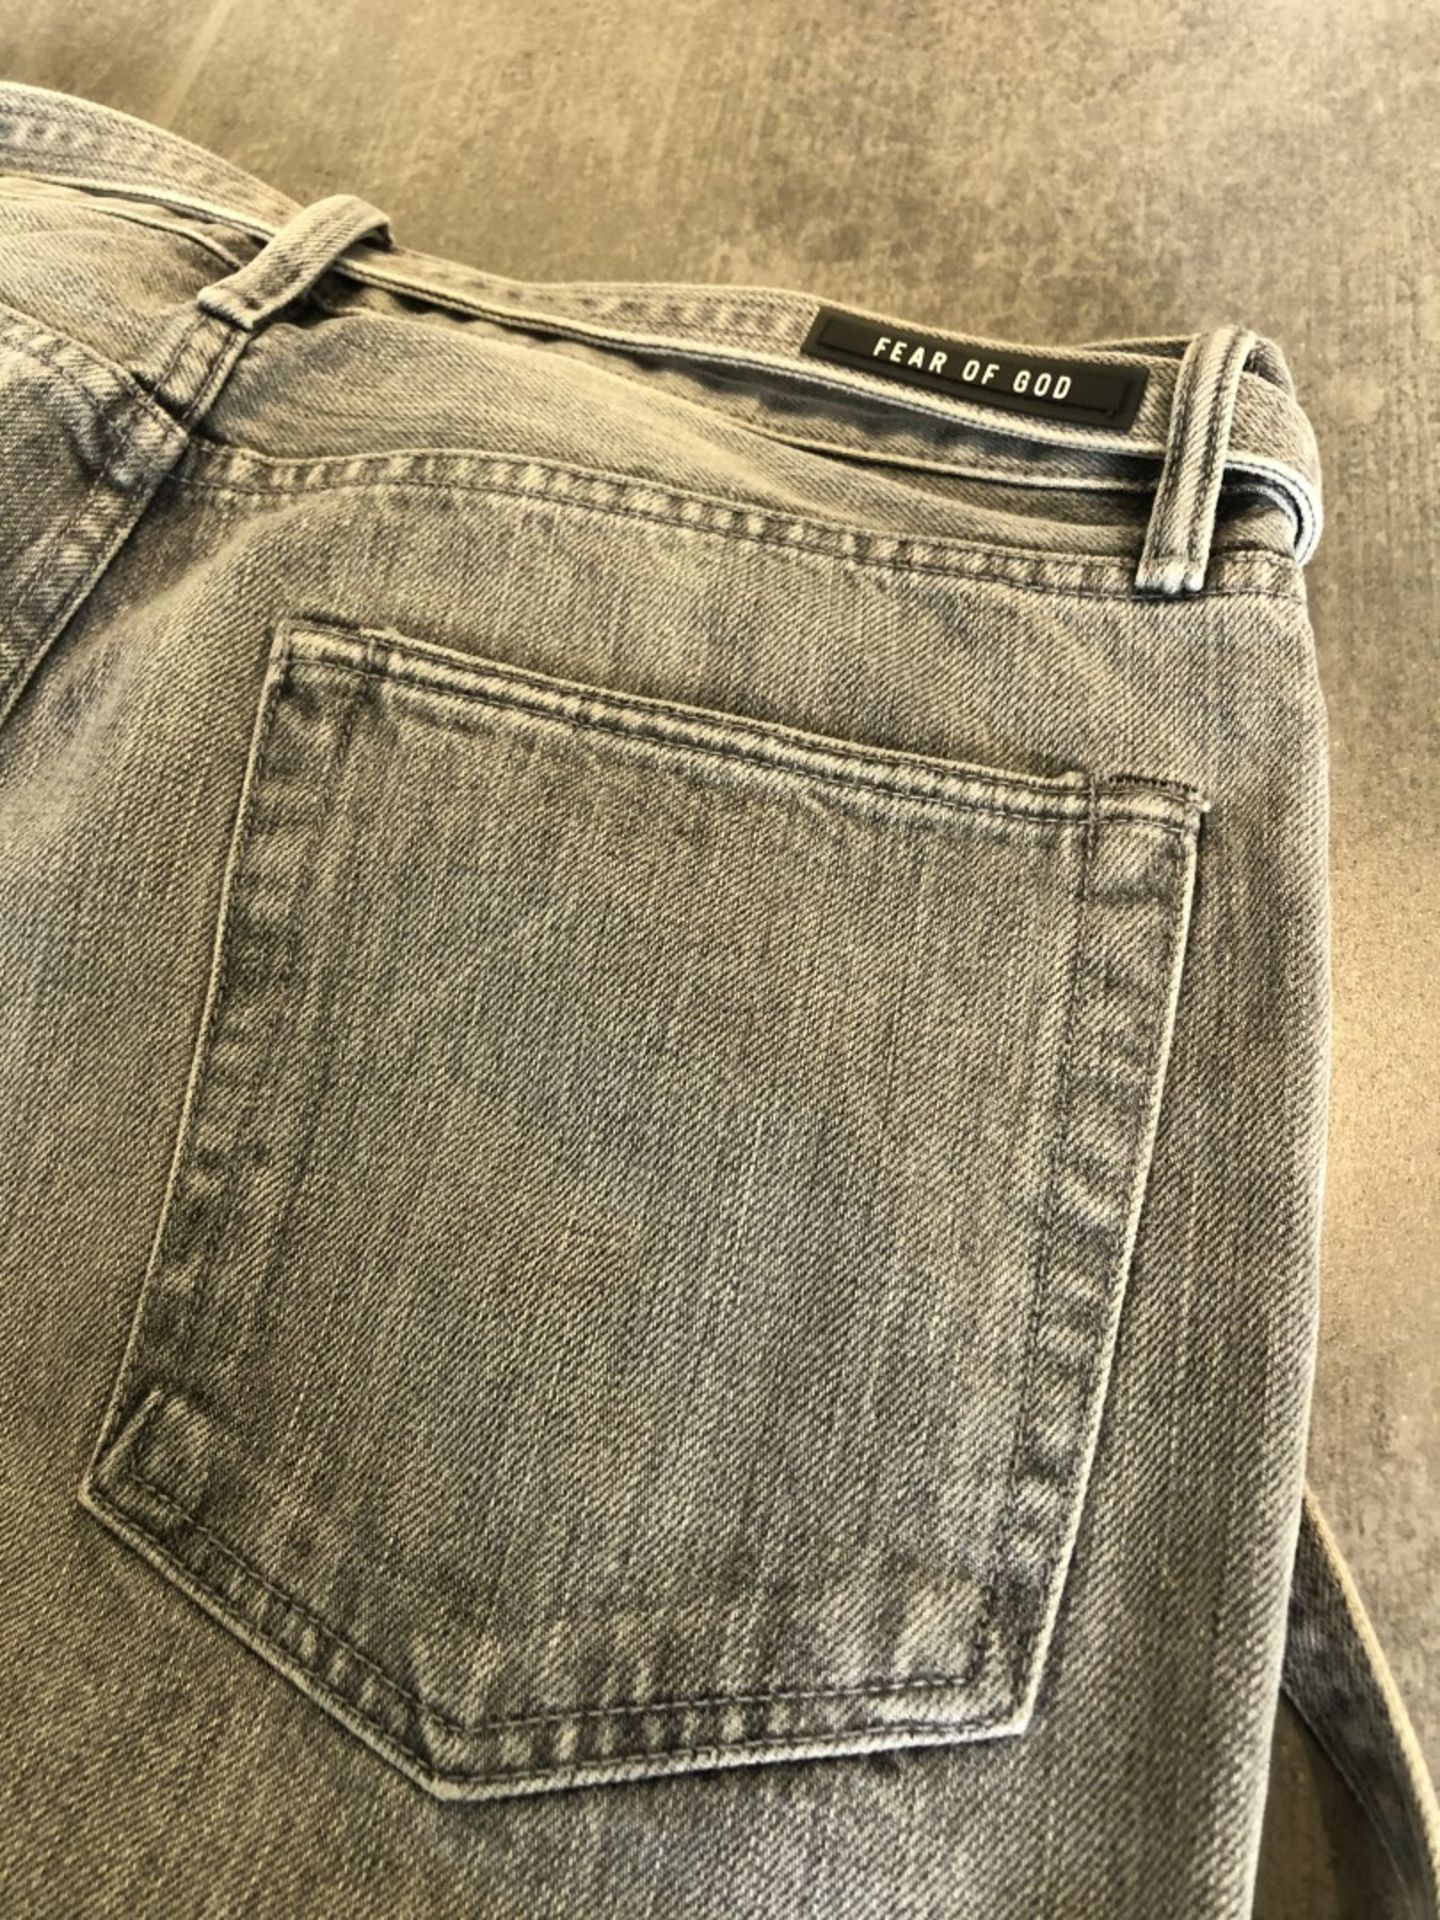 1 x Pair Of Men's Genuine Fear Of God Jeans - Grey With Rips - Size (EU/UK): 32/33/32/33 - - Image 3 of 7